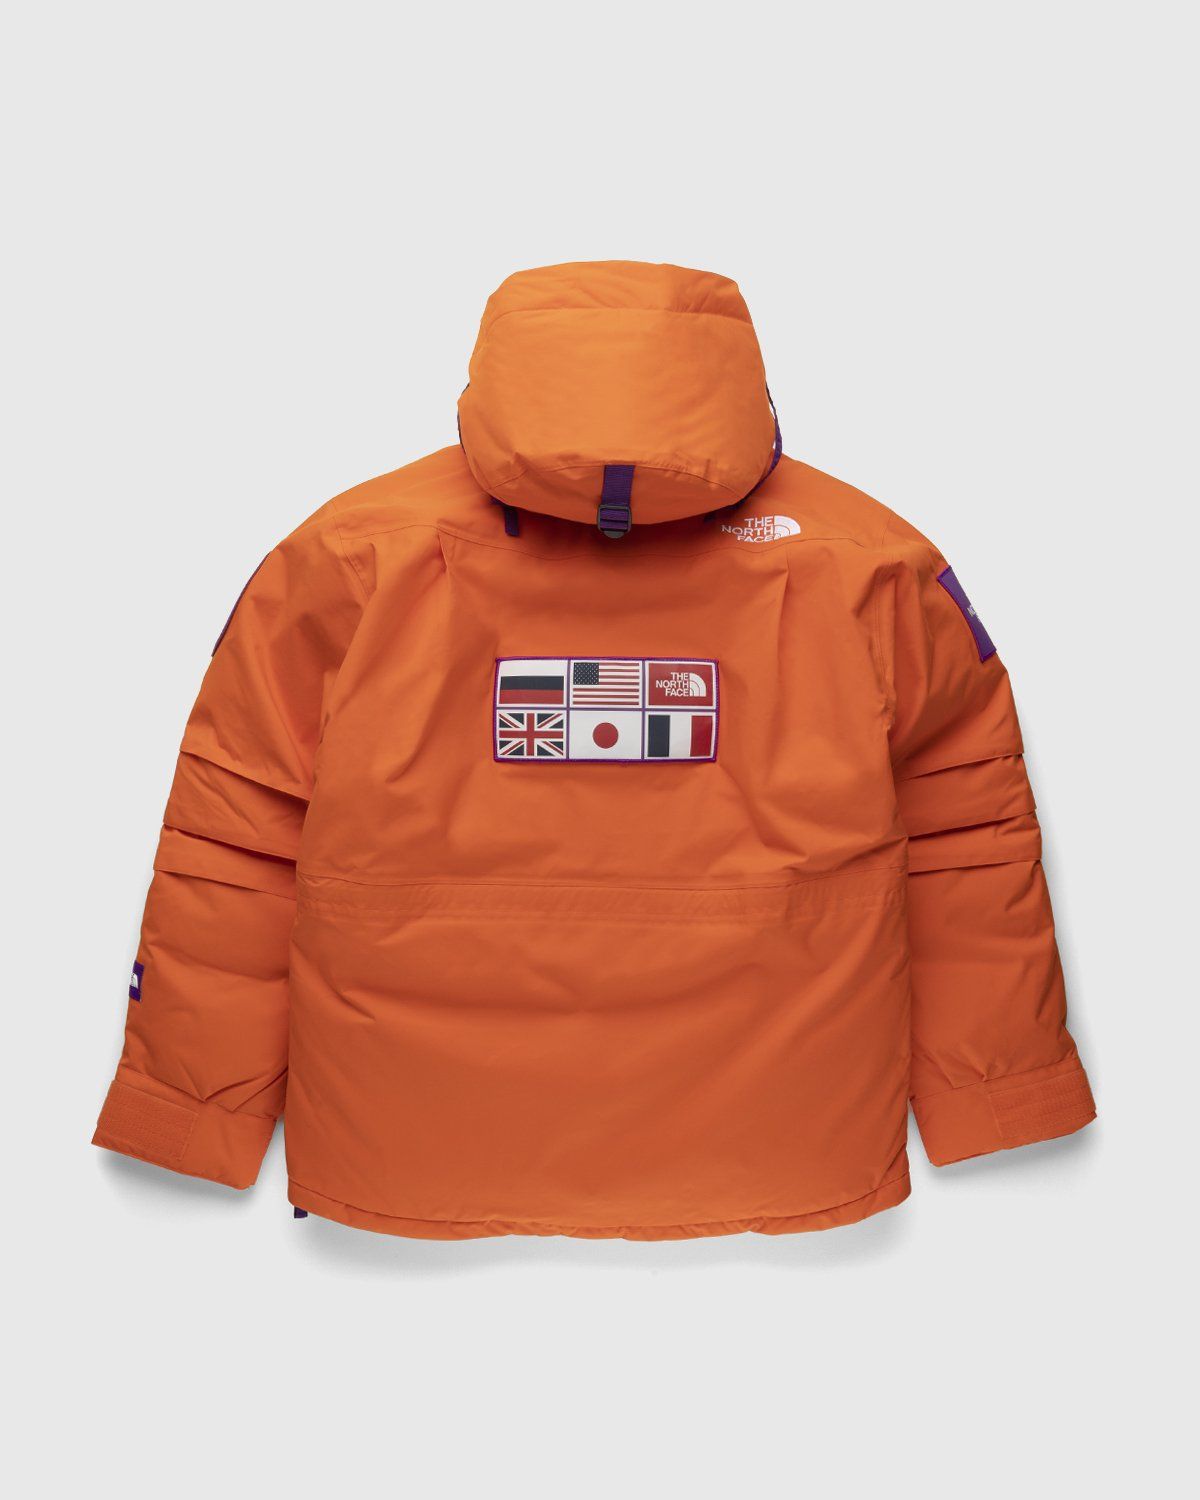 The North Face – Trans Antarctica Expedition Parka Red Orange - Outerwear - Orange - Image 2